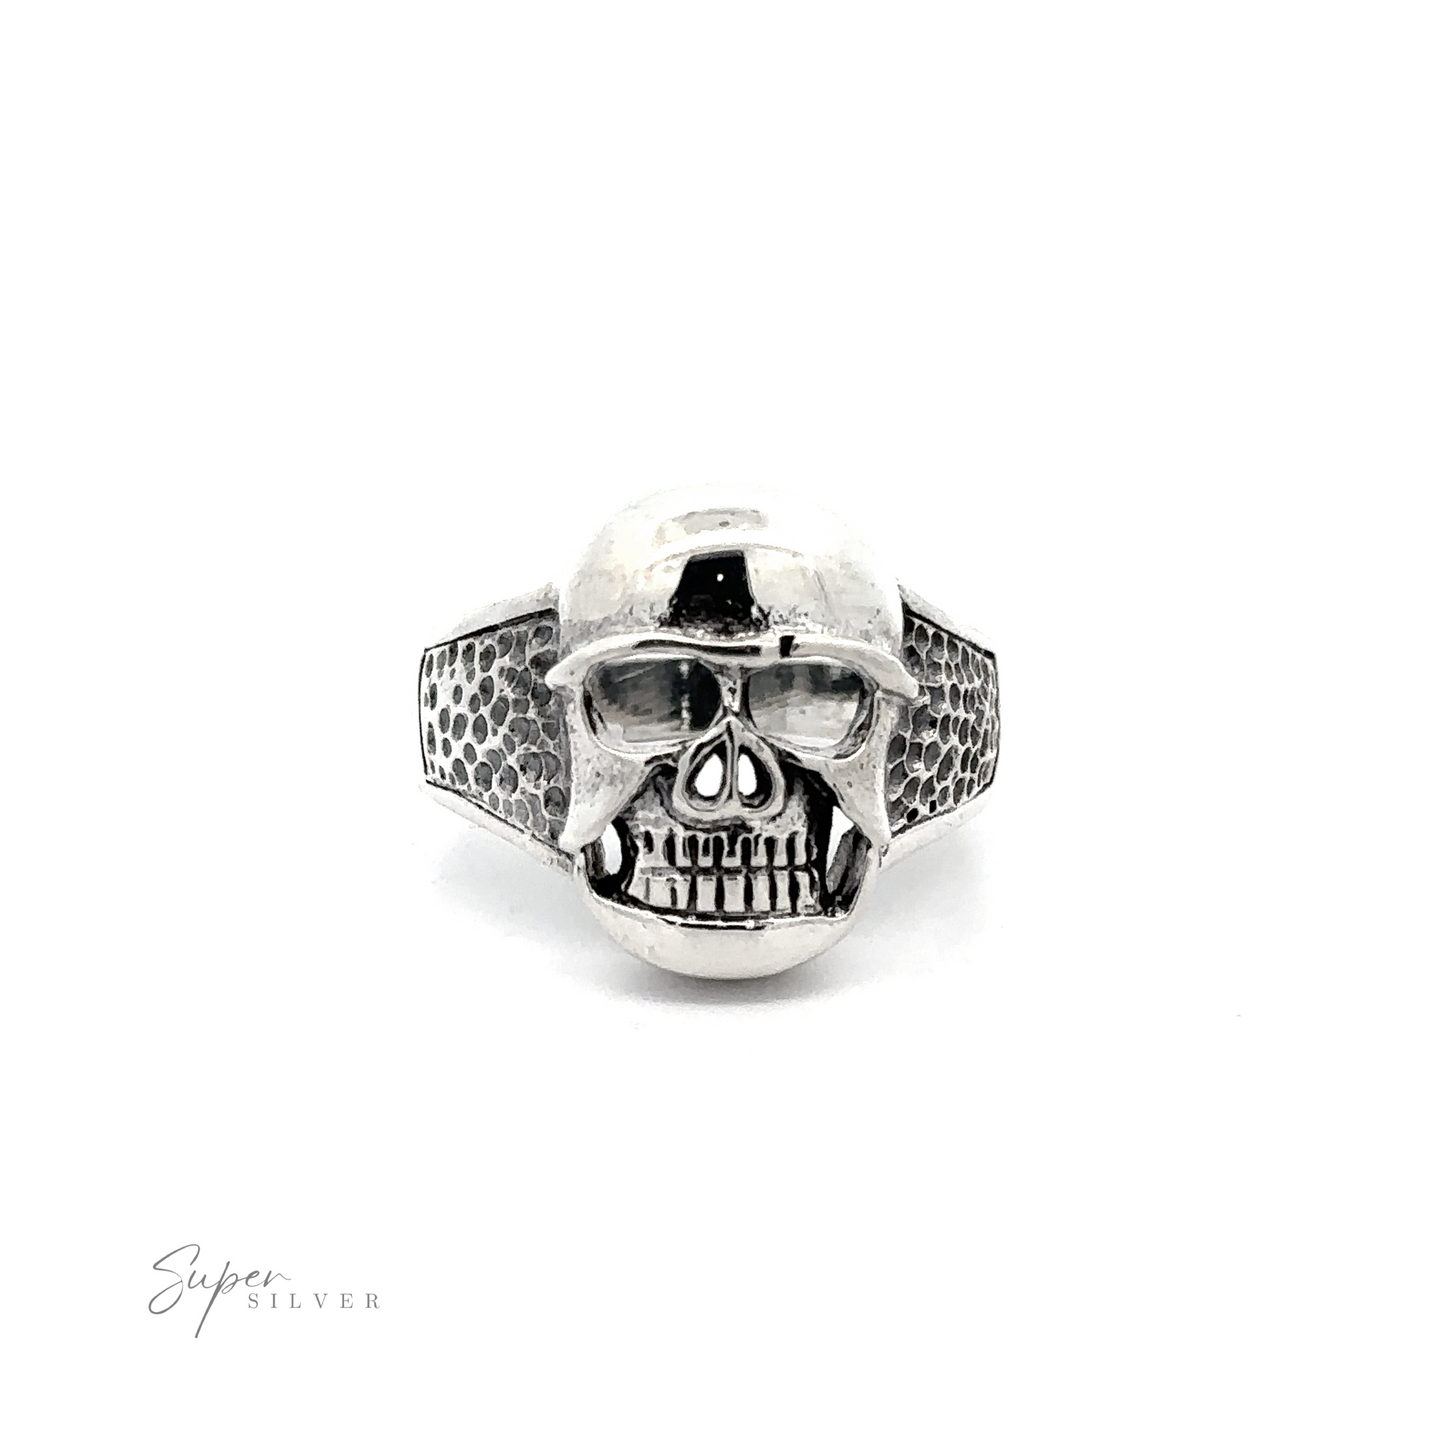 This edgy jewelry piece is a stunning Skull Statement Ring, featuring a skull design with detailed textures on the sides.